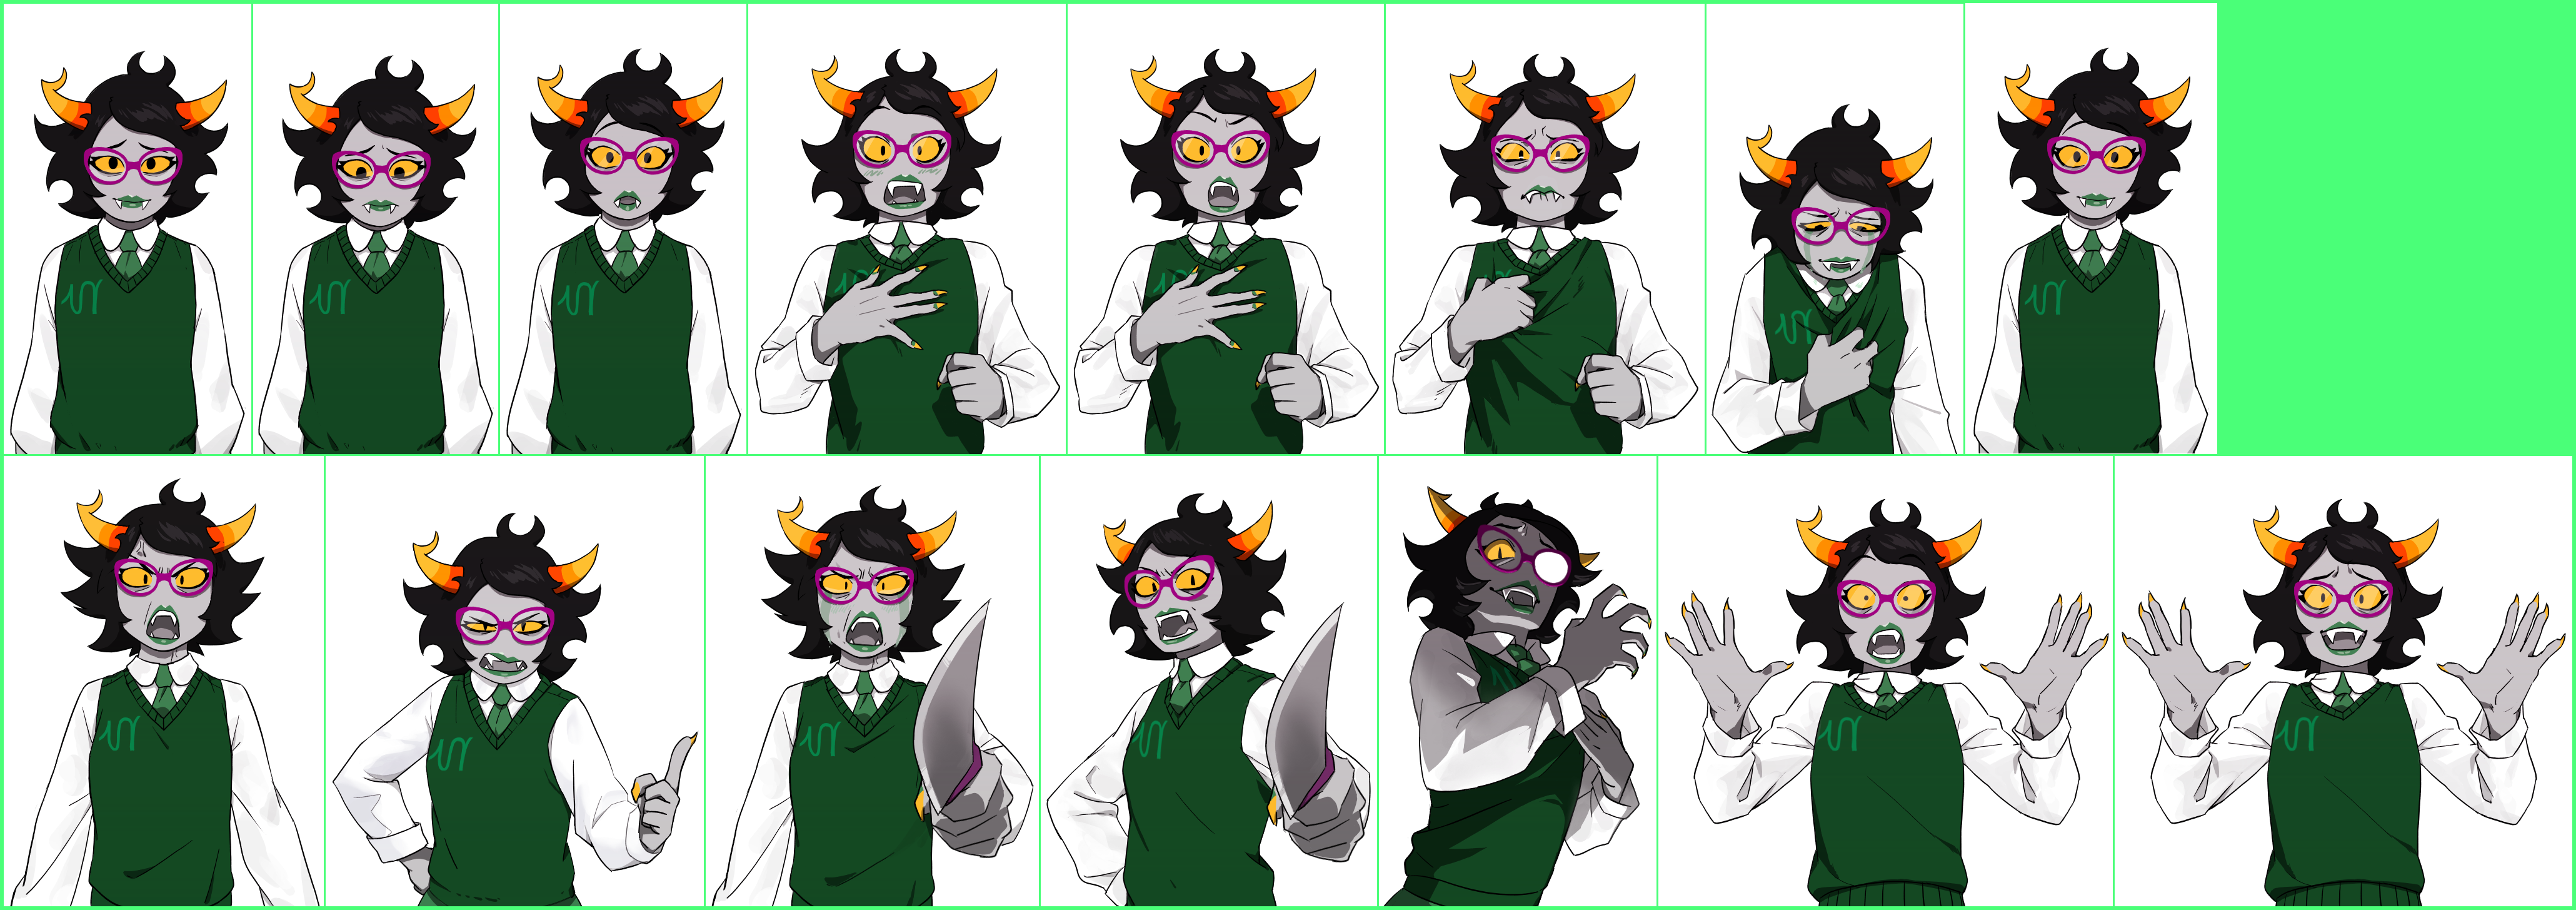 The Spriters Resource - Full Sheet View - Hiveswap 